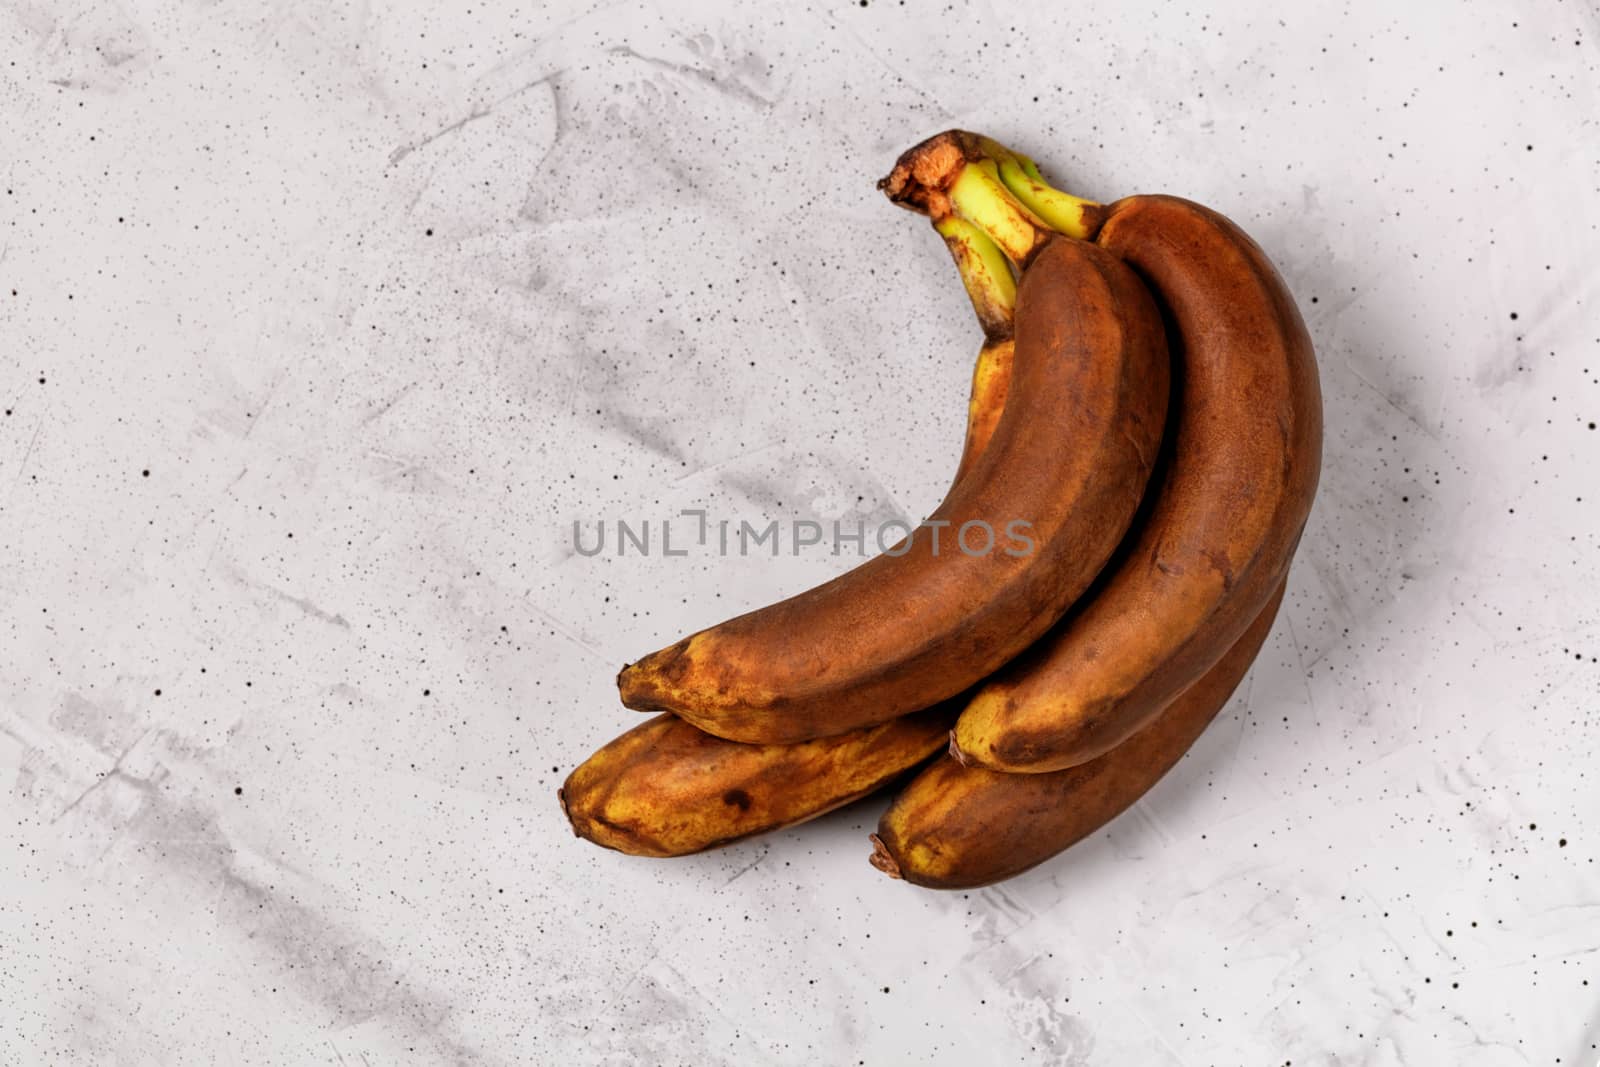 Ugly brown ripe bananas on a gray concrete background, flat lay, image with copy space.